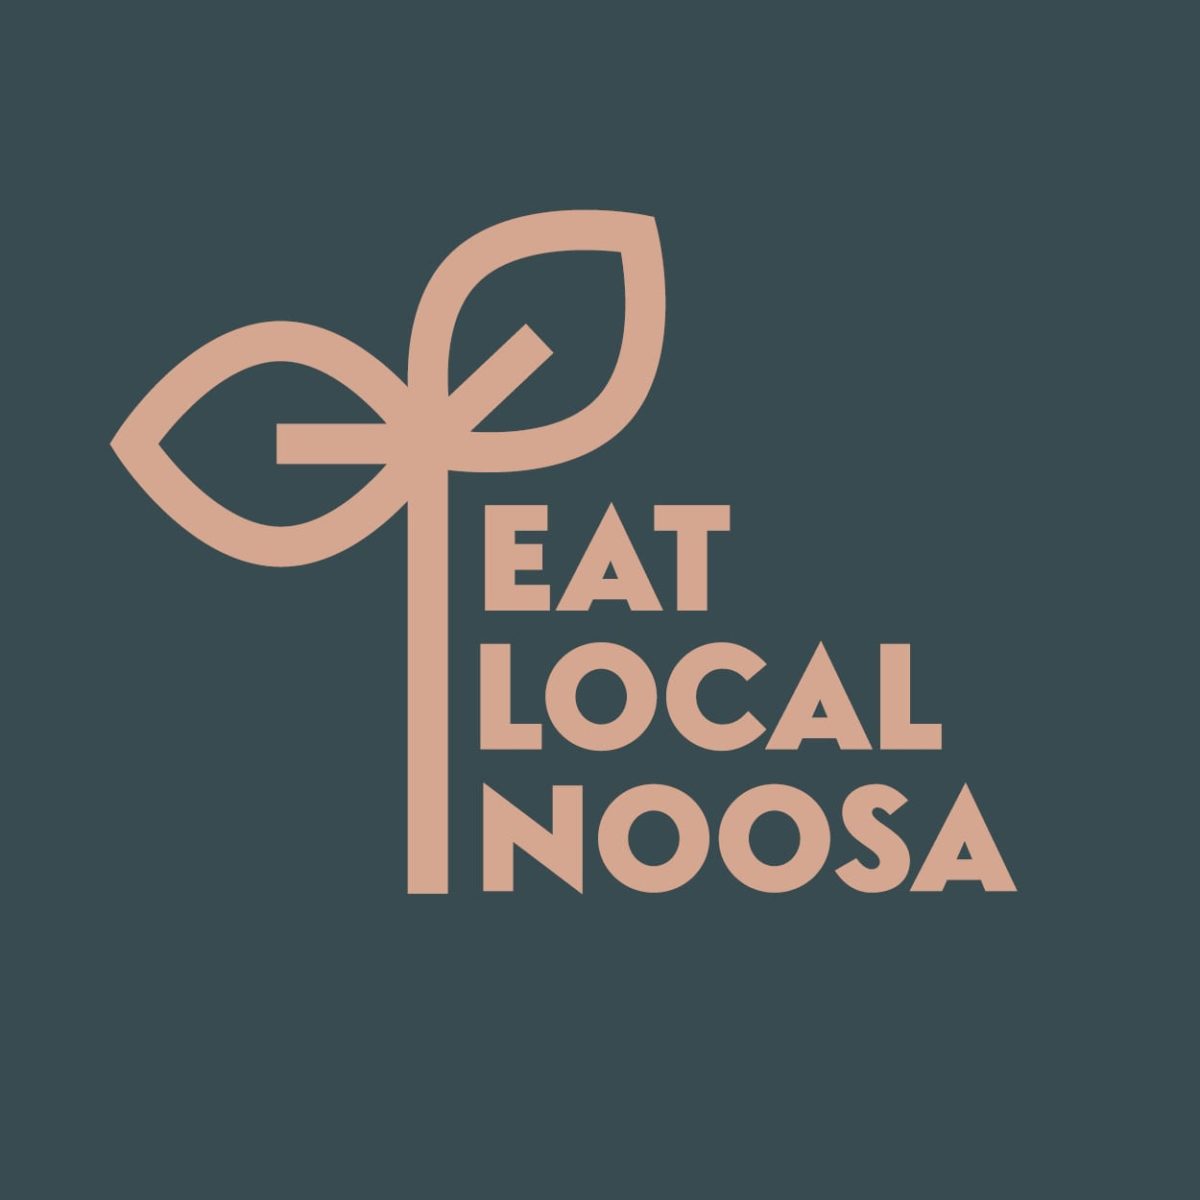 Eat Local Noosa Different Colours Social Posts 600x6002